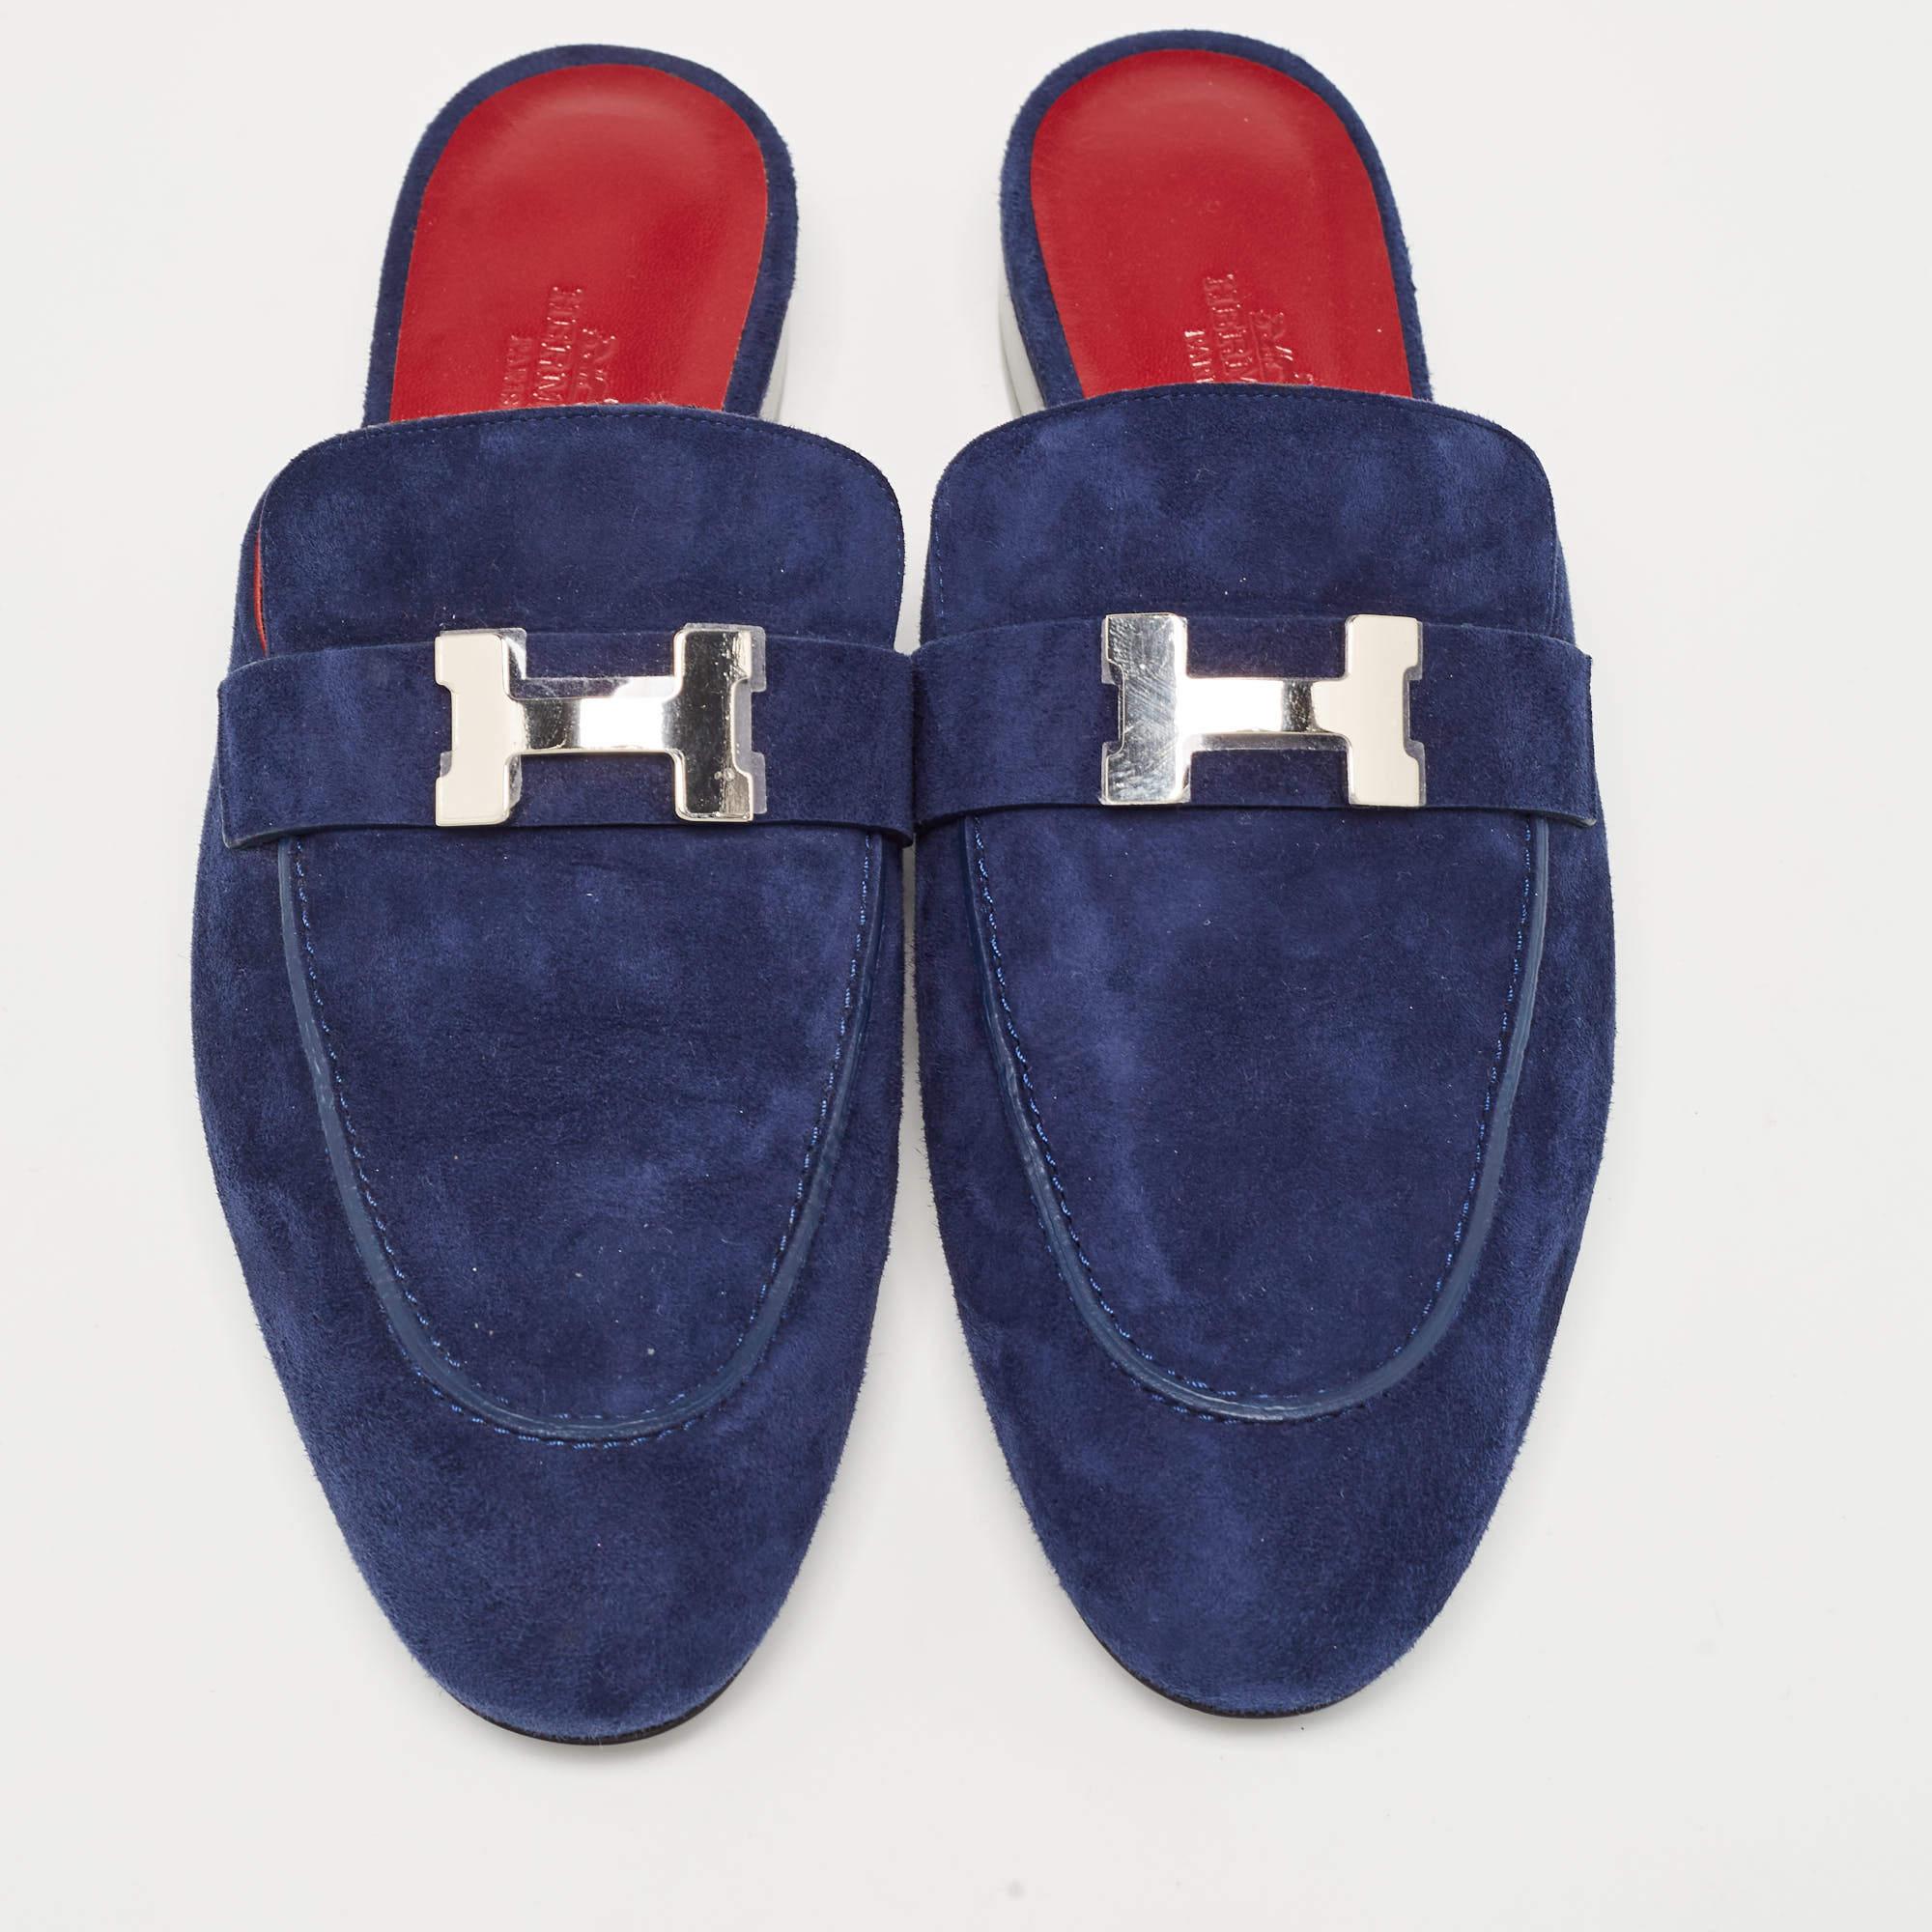 A perfect blend of luxury, style, and comfort, these designer mules are made using quality materials and frame your feet in the most elegant way. They can be paired with a host of outfits from your wardrobe.

Includes: Original Dustbag, Original Box